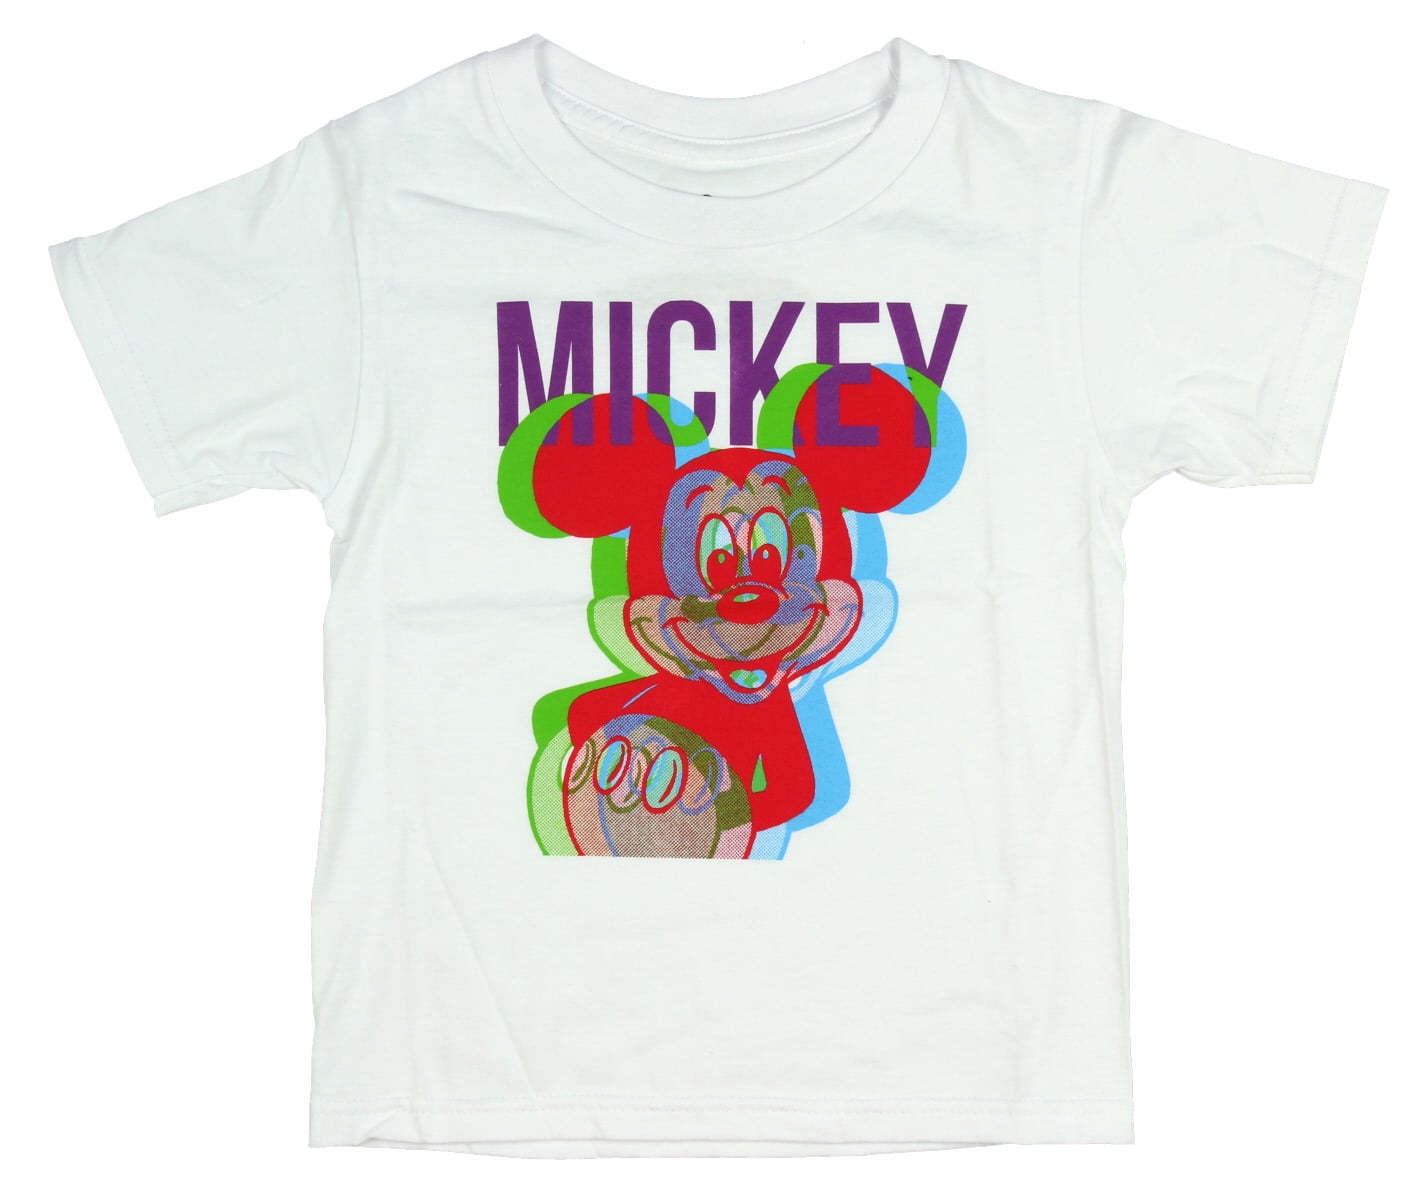 New Disney Mickey Mouse Character Multi-Color 100% Cotton Kids T-Shirt 